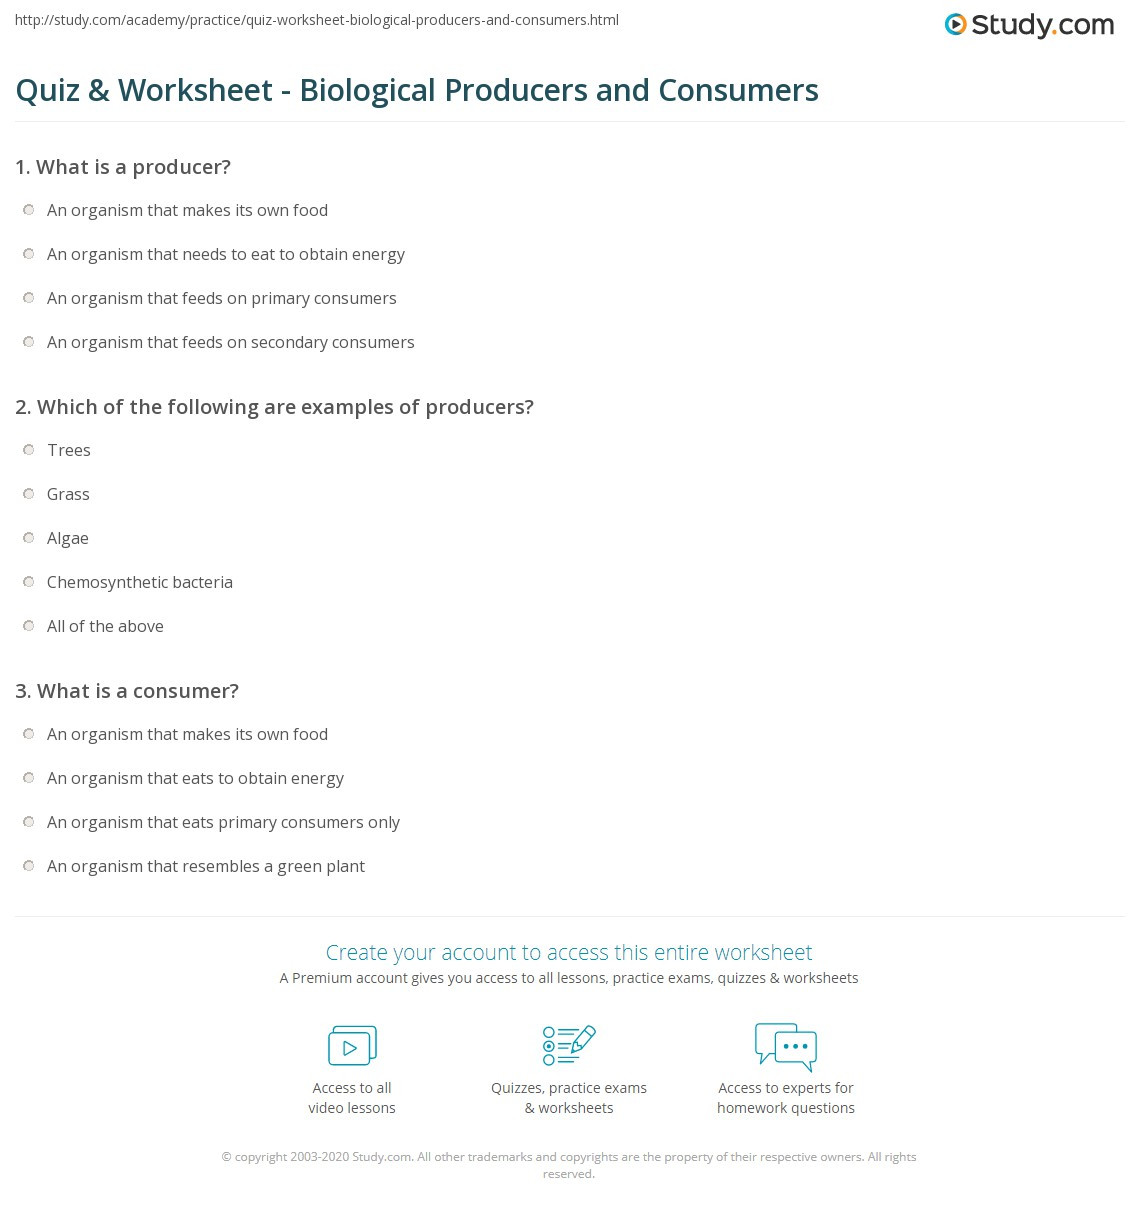 Producers and Consumers Worksheet Quiz &amp; Worksheet Biological Producers and Consumers